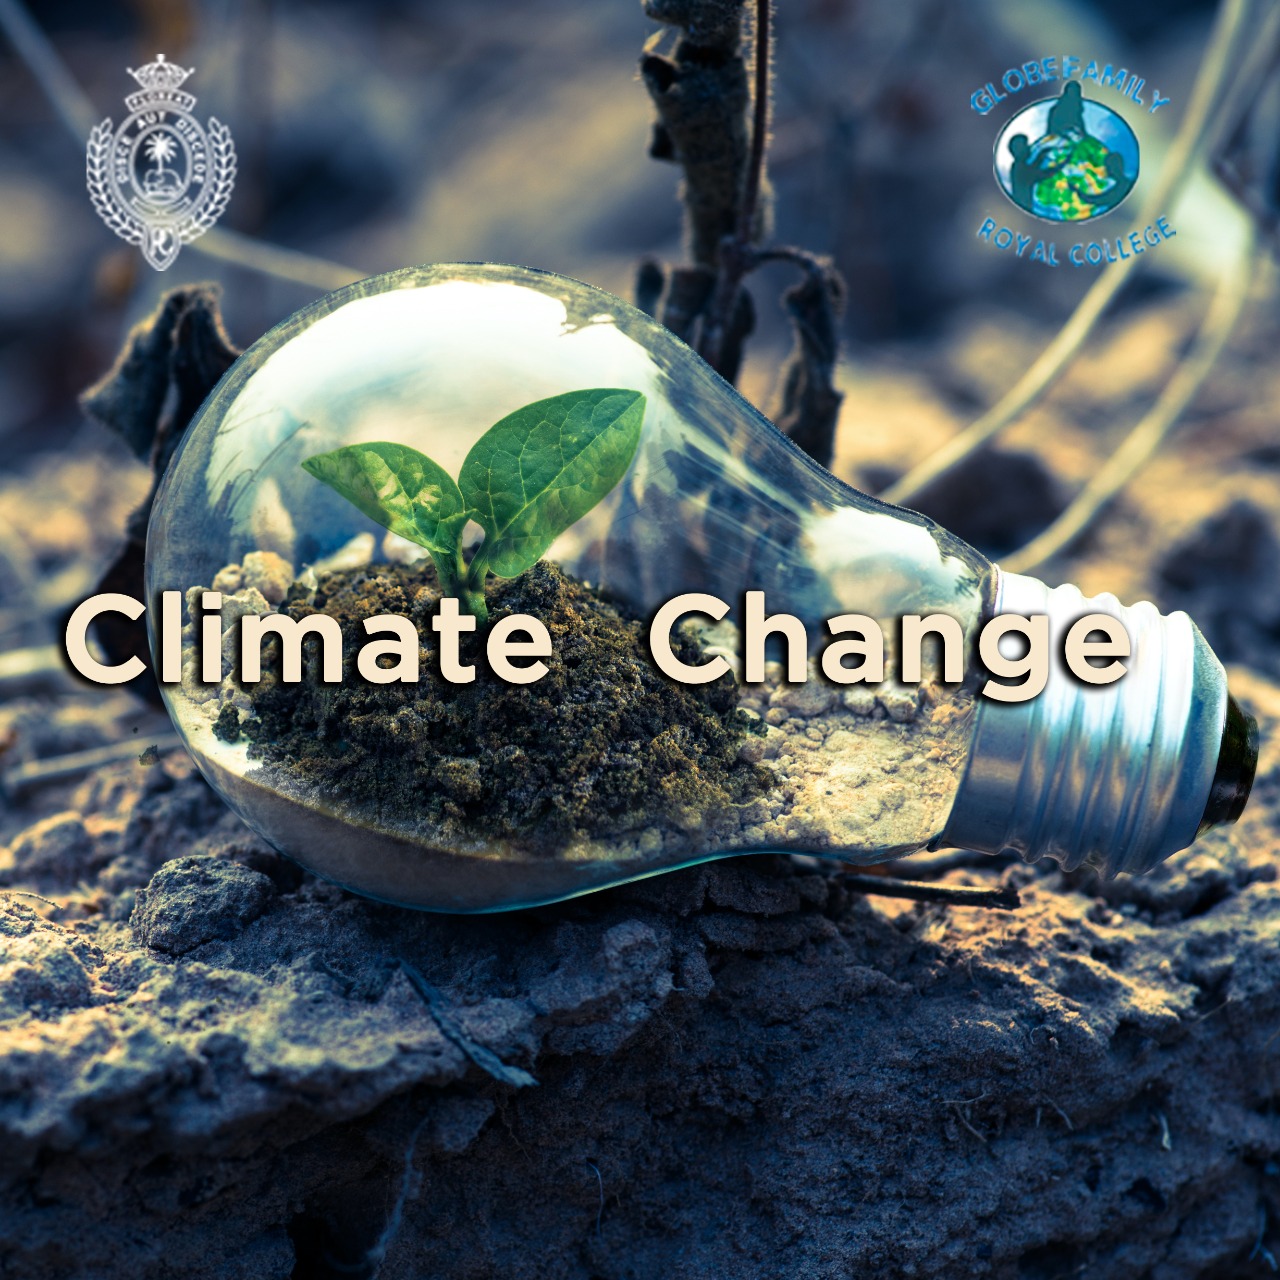 climate change. - The Royal College